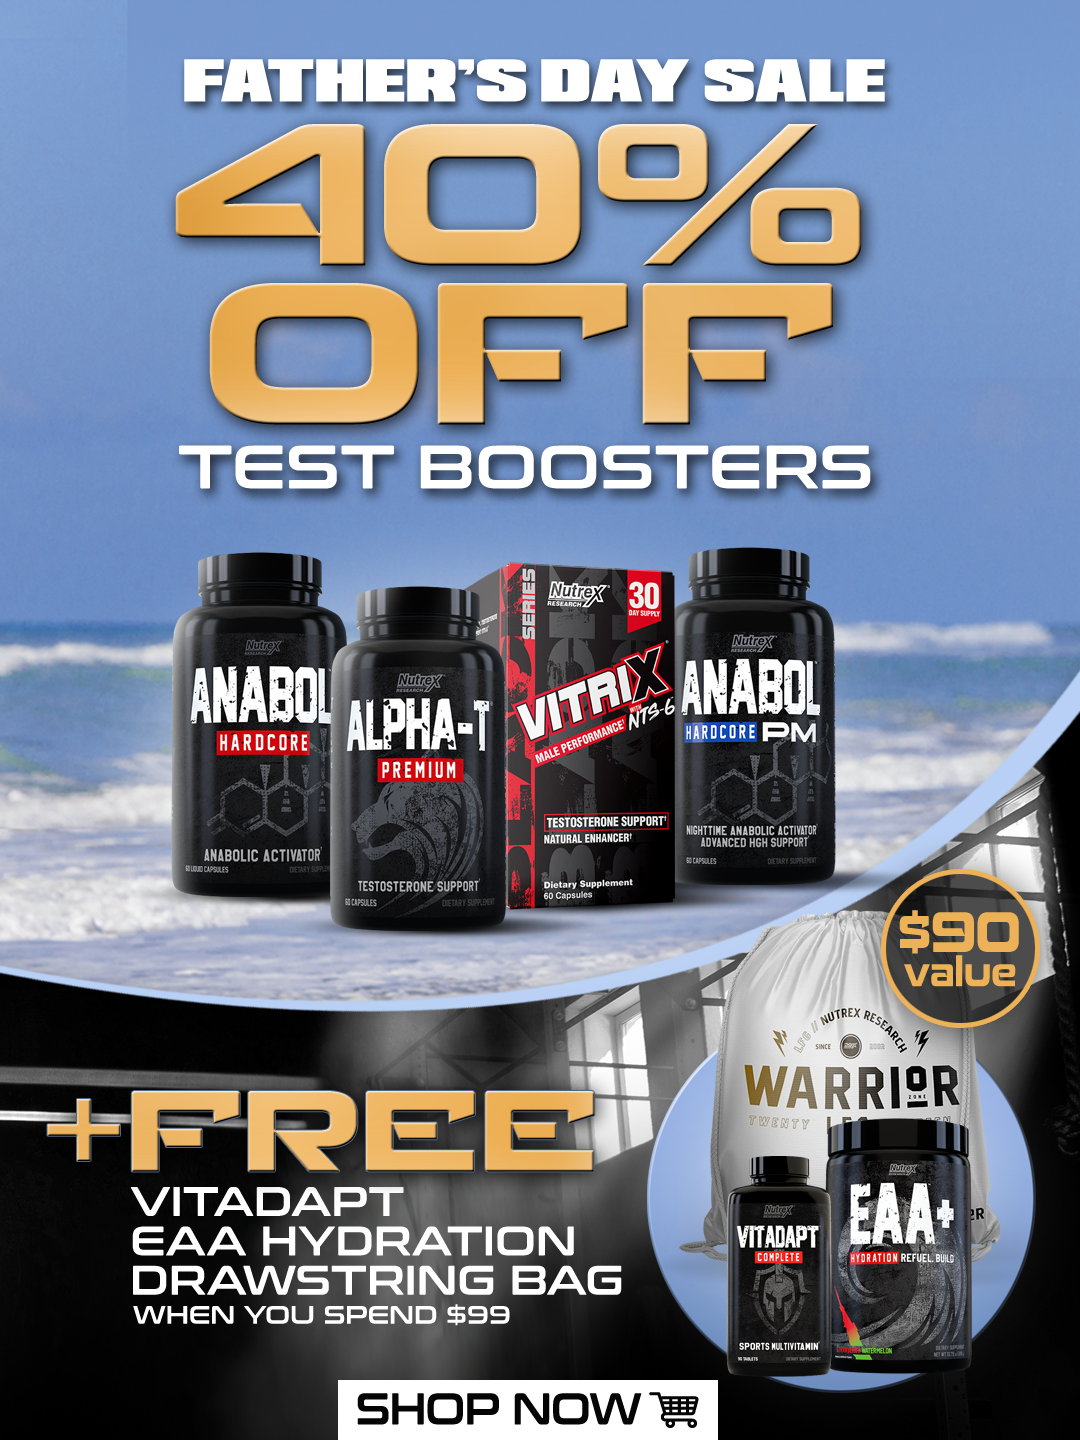 40% off test boosters